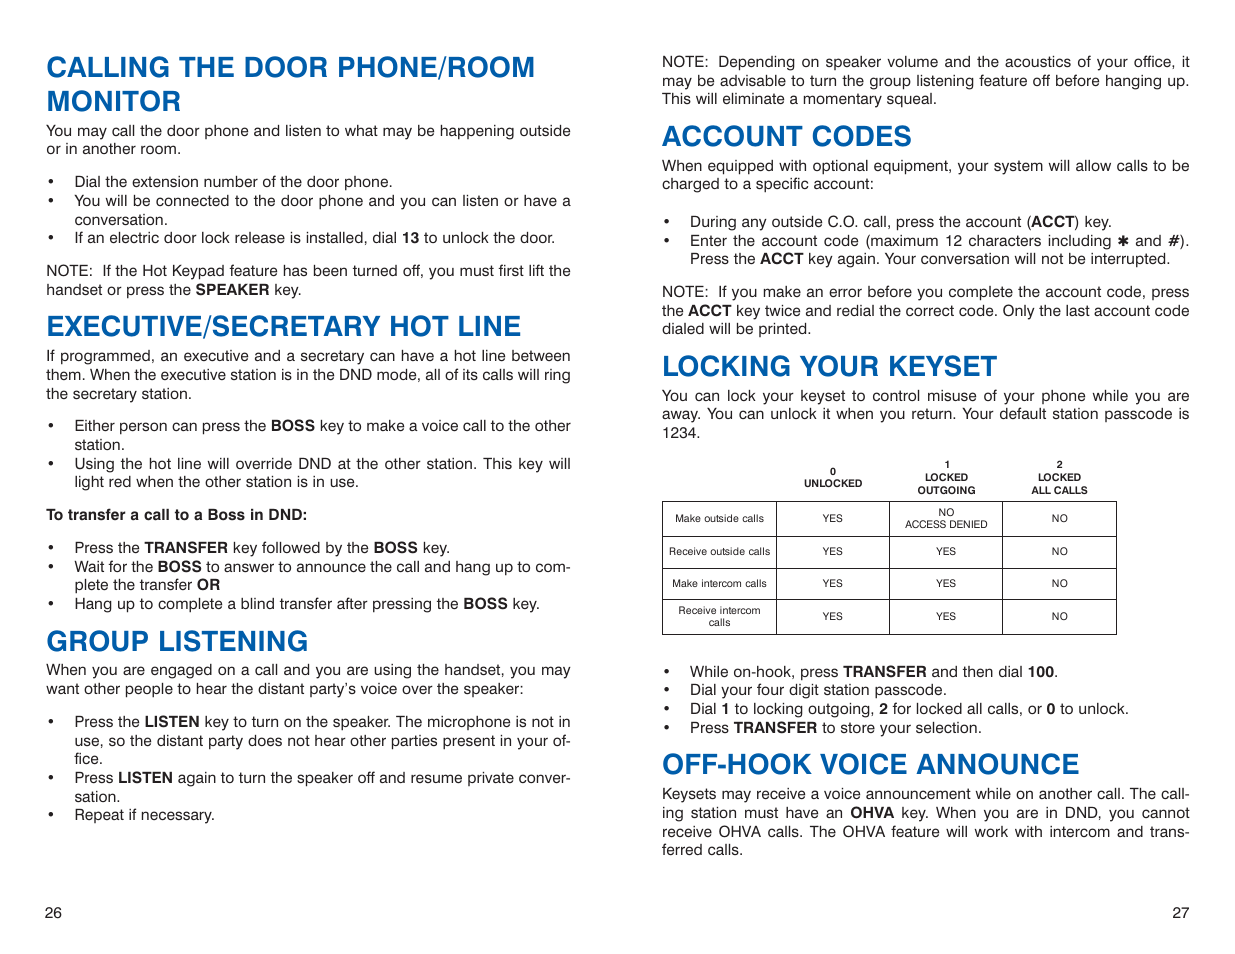 Account codes, Locking your keyset, Off-hook voice announce | Calling the door phone/room monitor, Executive/secretary hot line, Group listening | Sharp DS 24D User Manual | Page 16 / 24